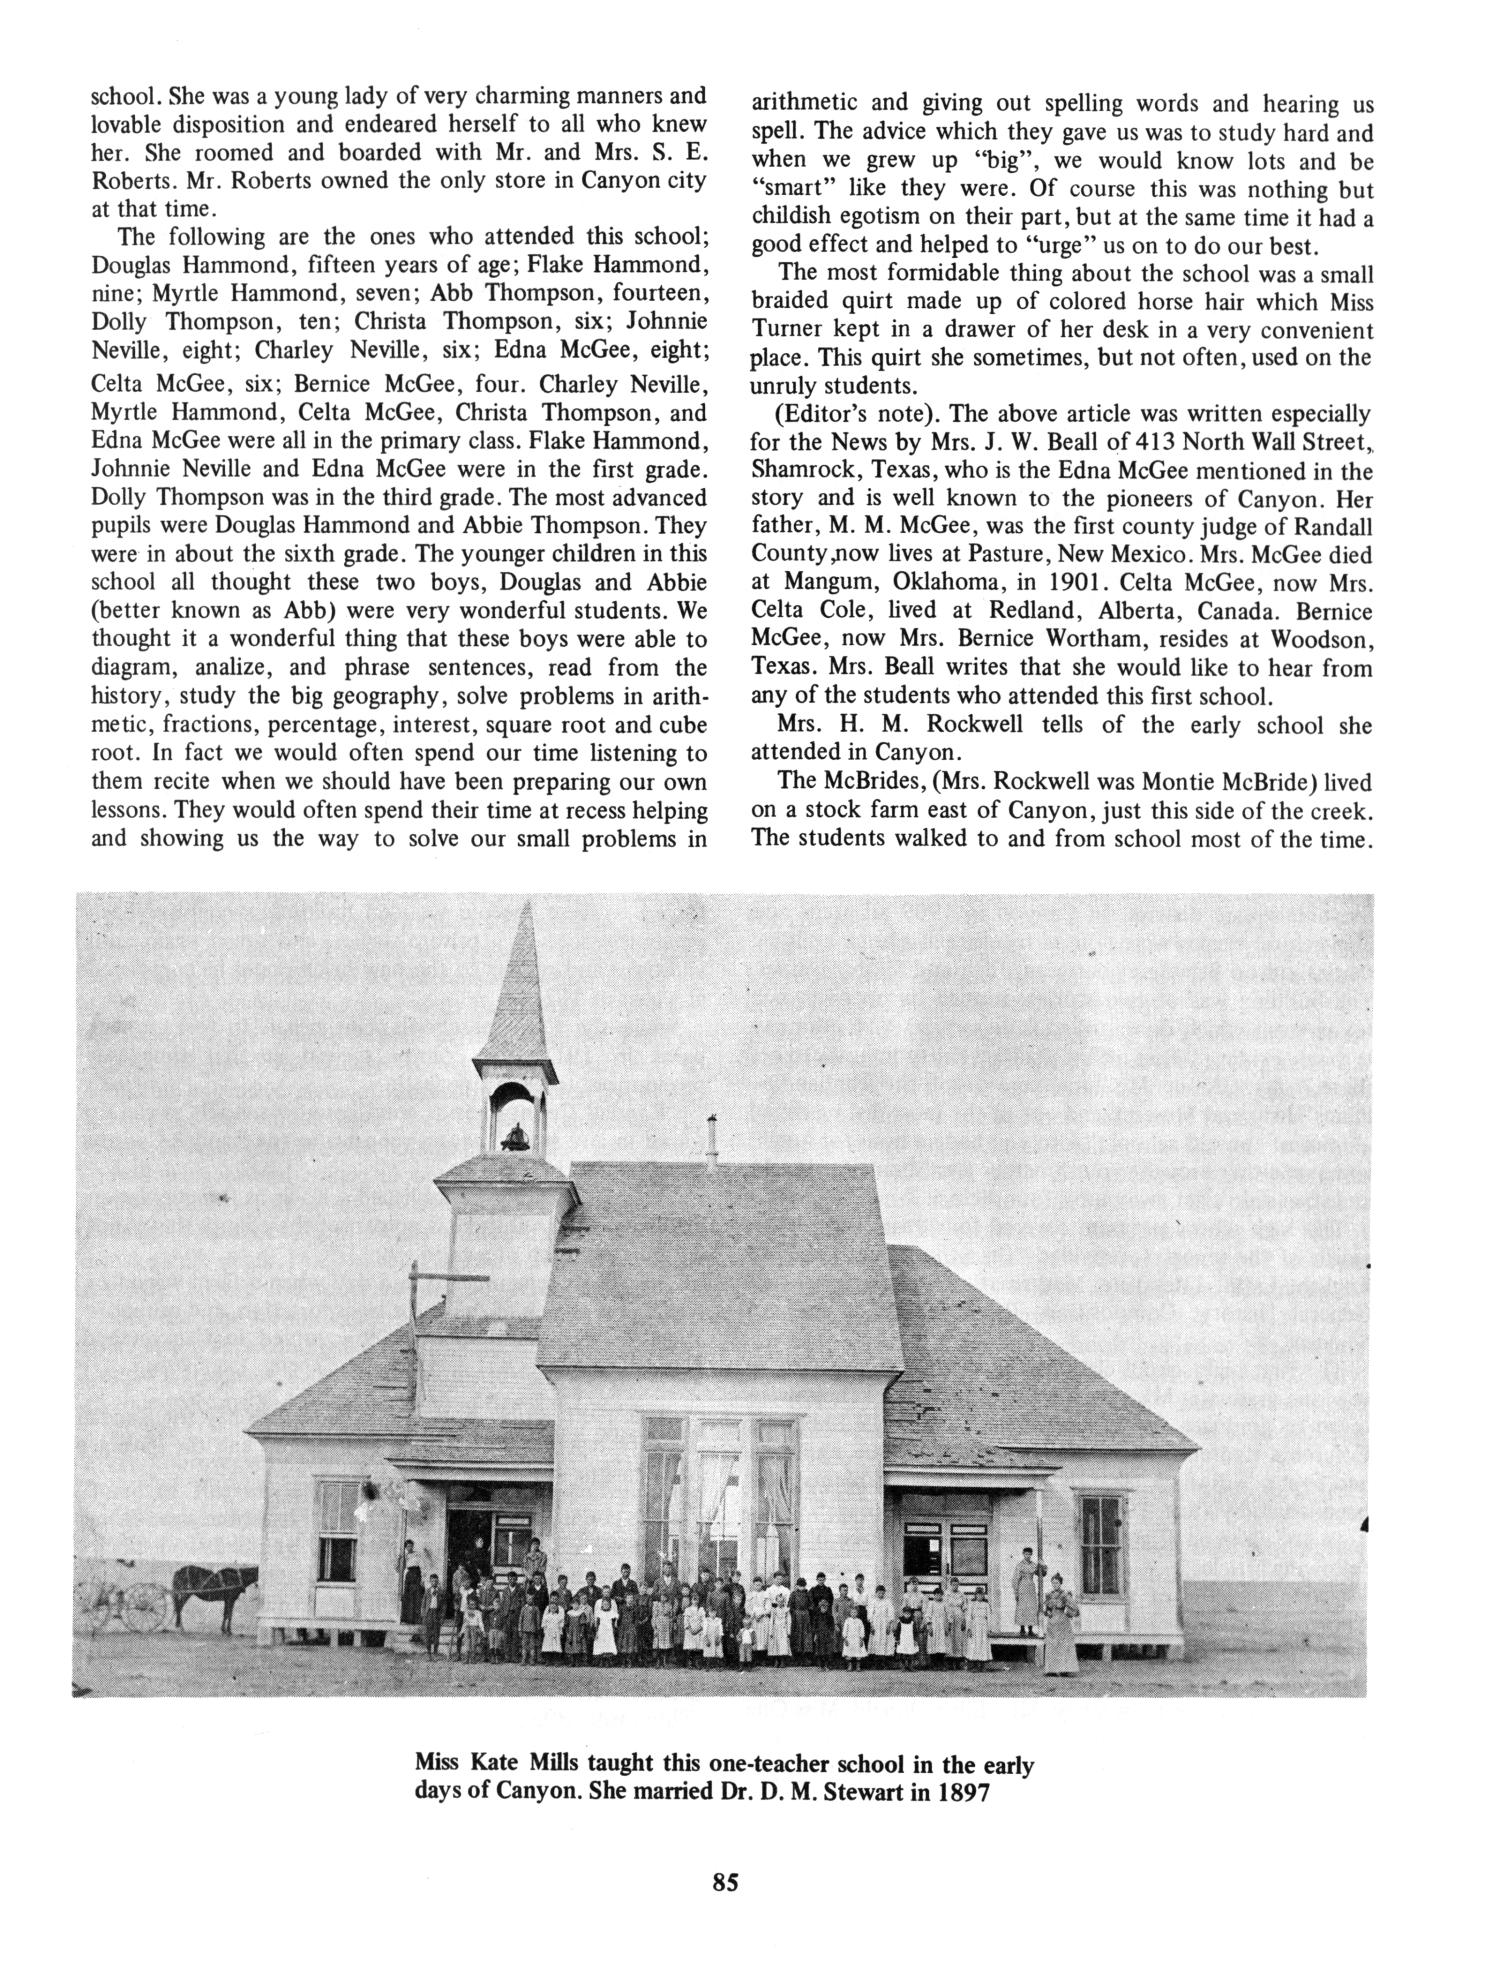 The Randall County Story from 1541 to 1910 Page 85 The Portal to